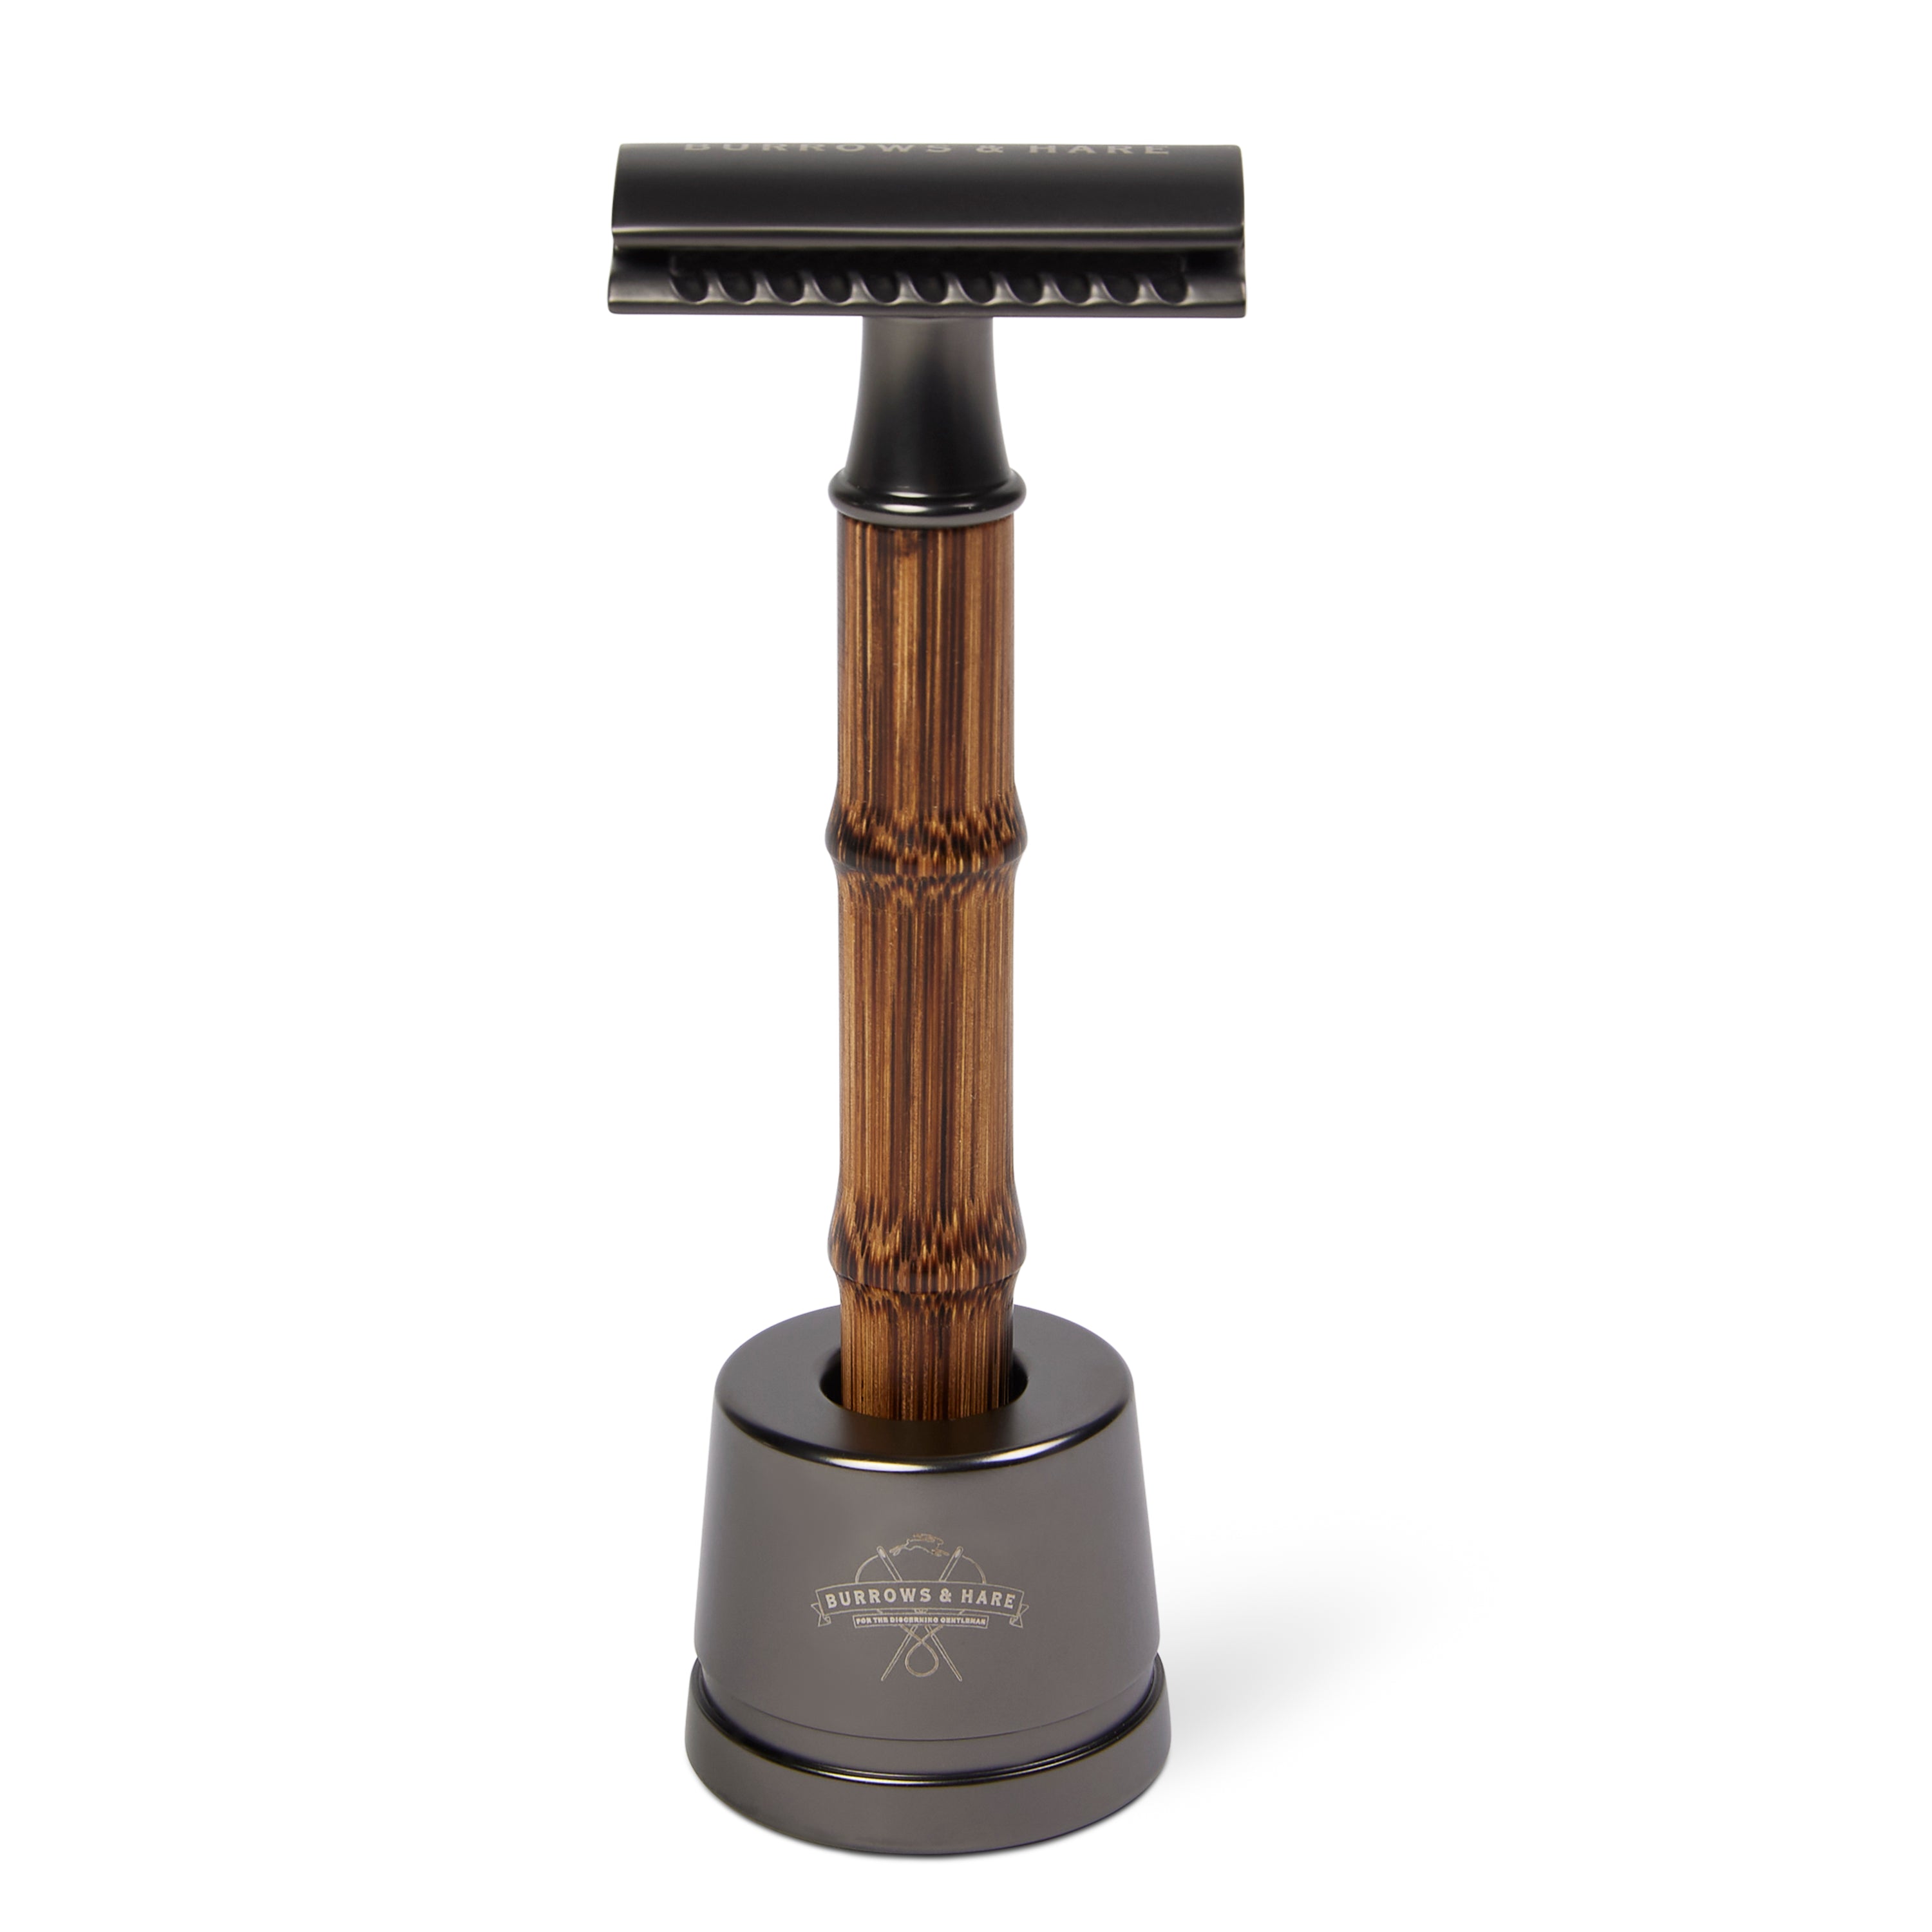 Burrows & Hare  Double Edge Safety Razor & Stand - Bamboo